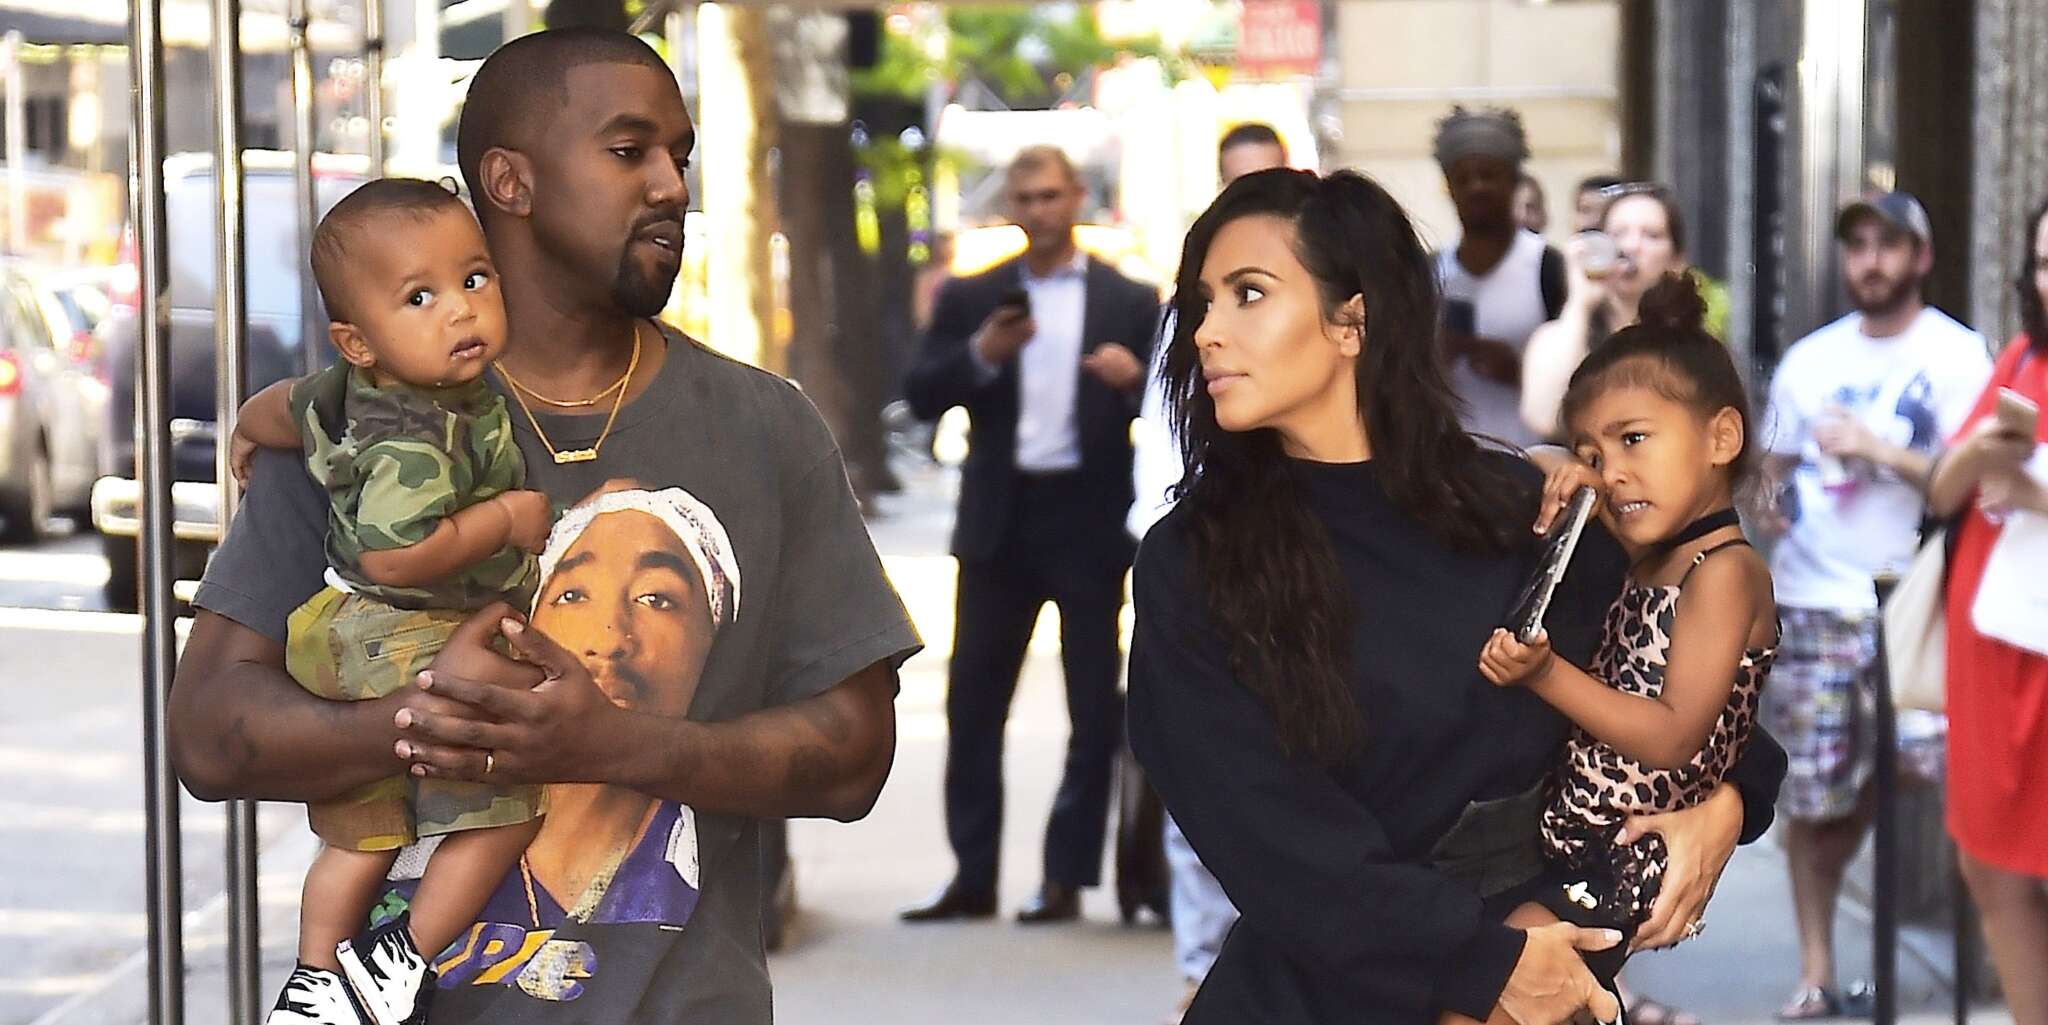 KUWTK: Kim Kardashian And Kanye West Don’t Want To File For Divorce For Different Reasons!